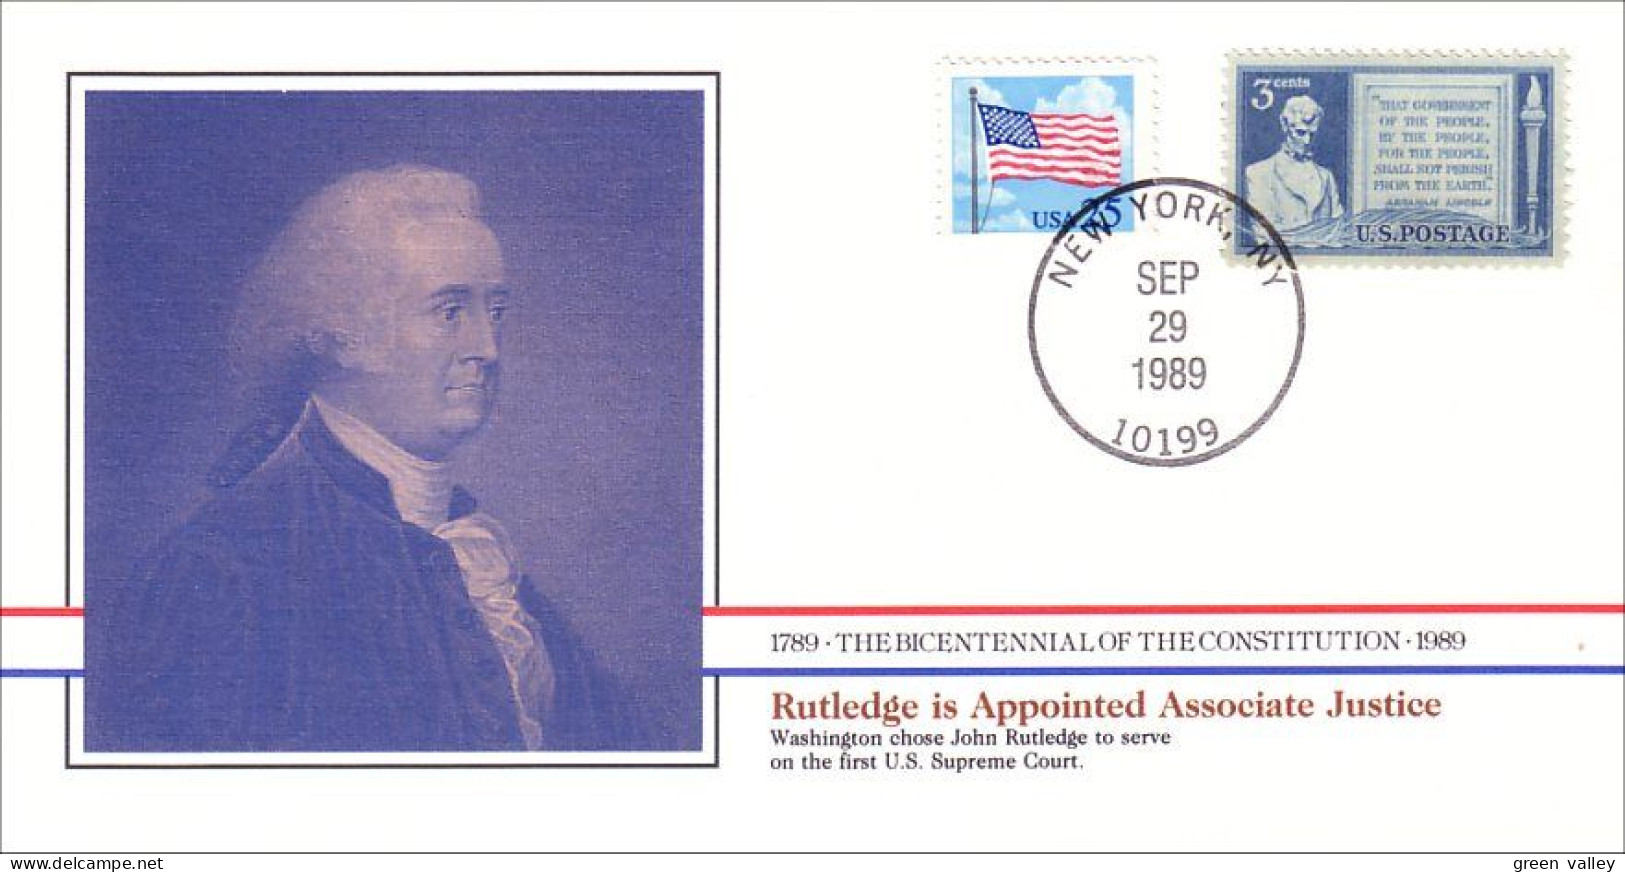 American Constitution Rutledge Appointed Associate Justice Sep 29 1789 Cover ( A82 98) - Onafhankelijkheid USA